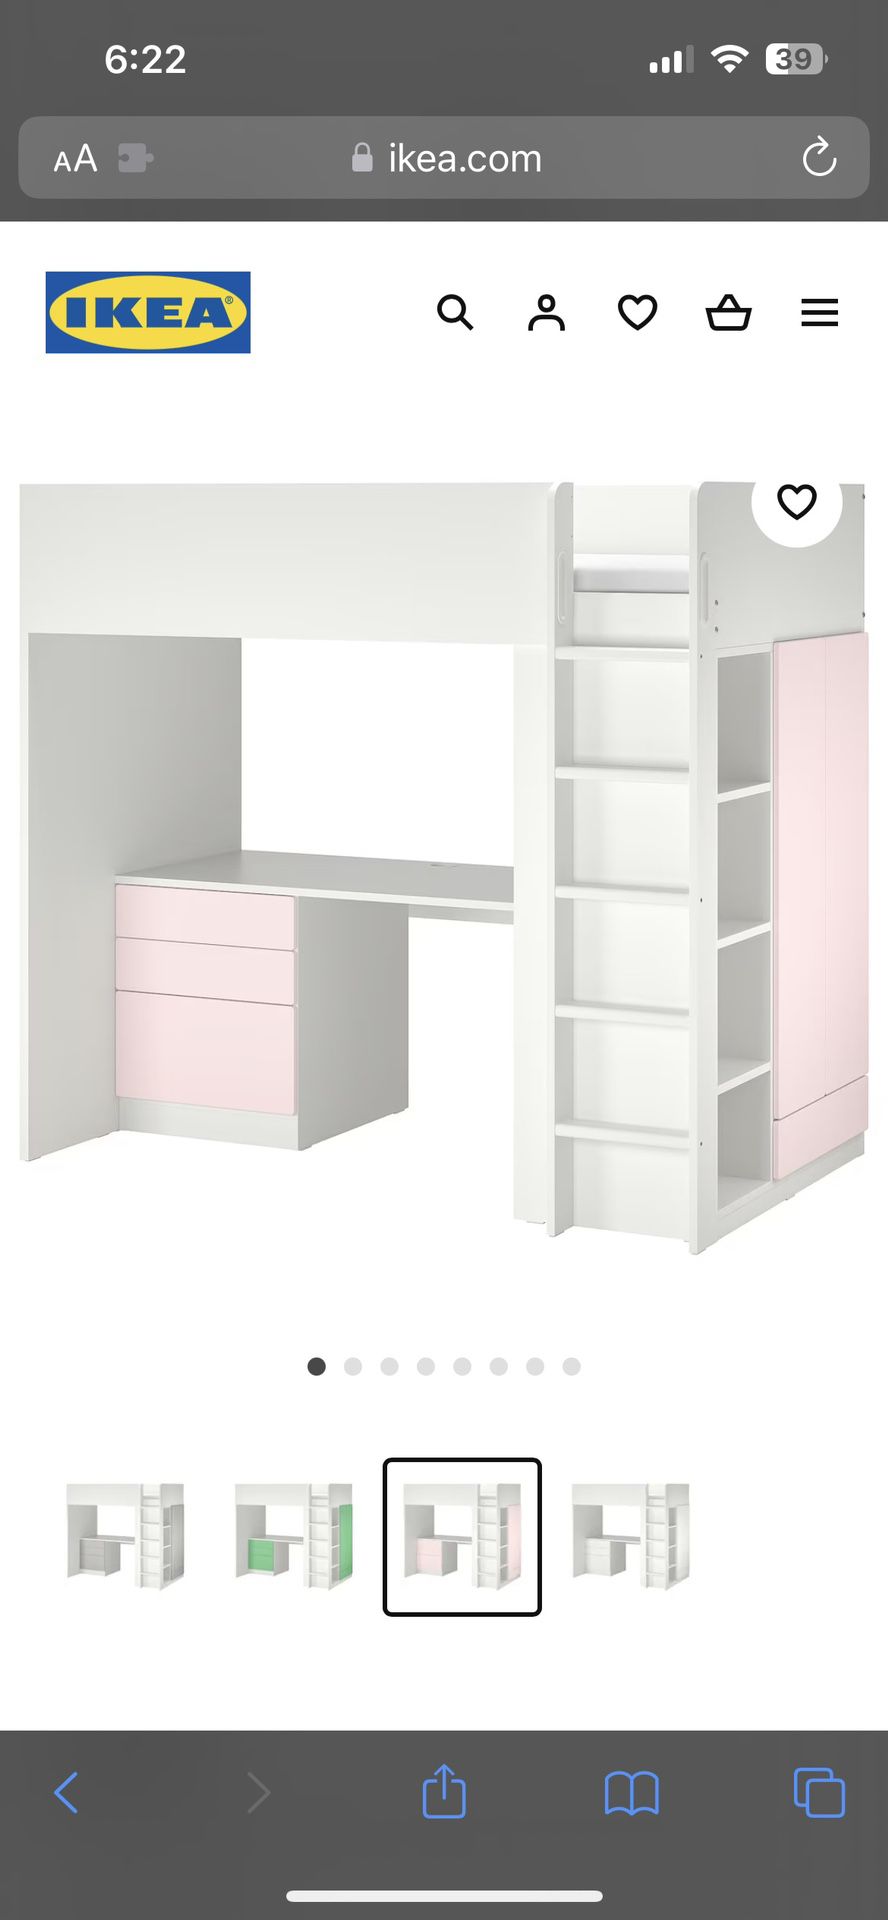 Pink and White IKEA Loft Bed